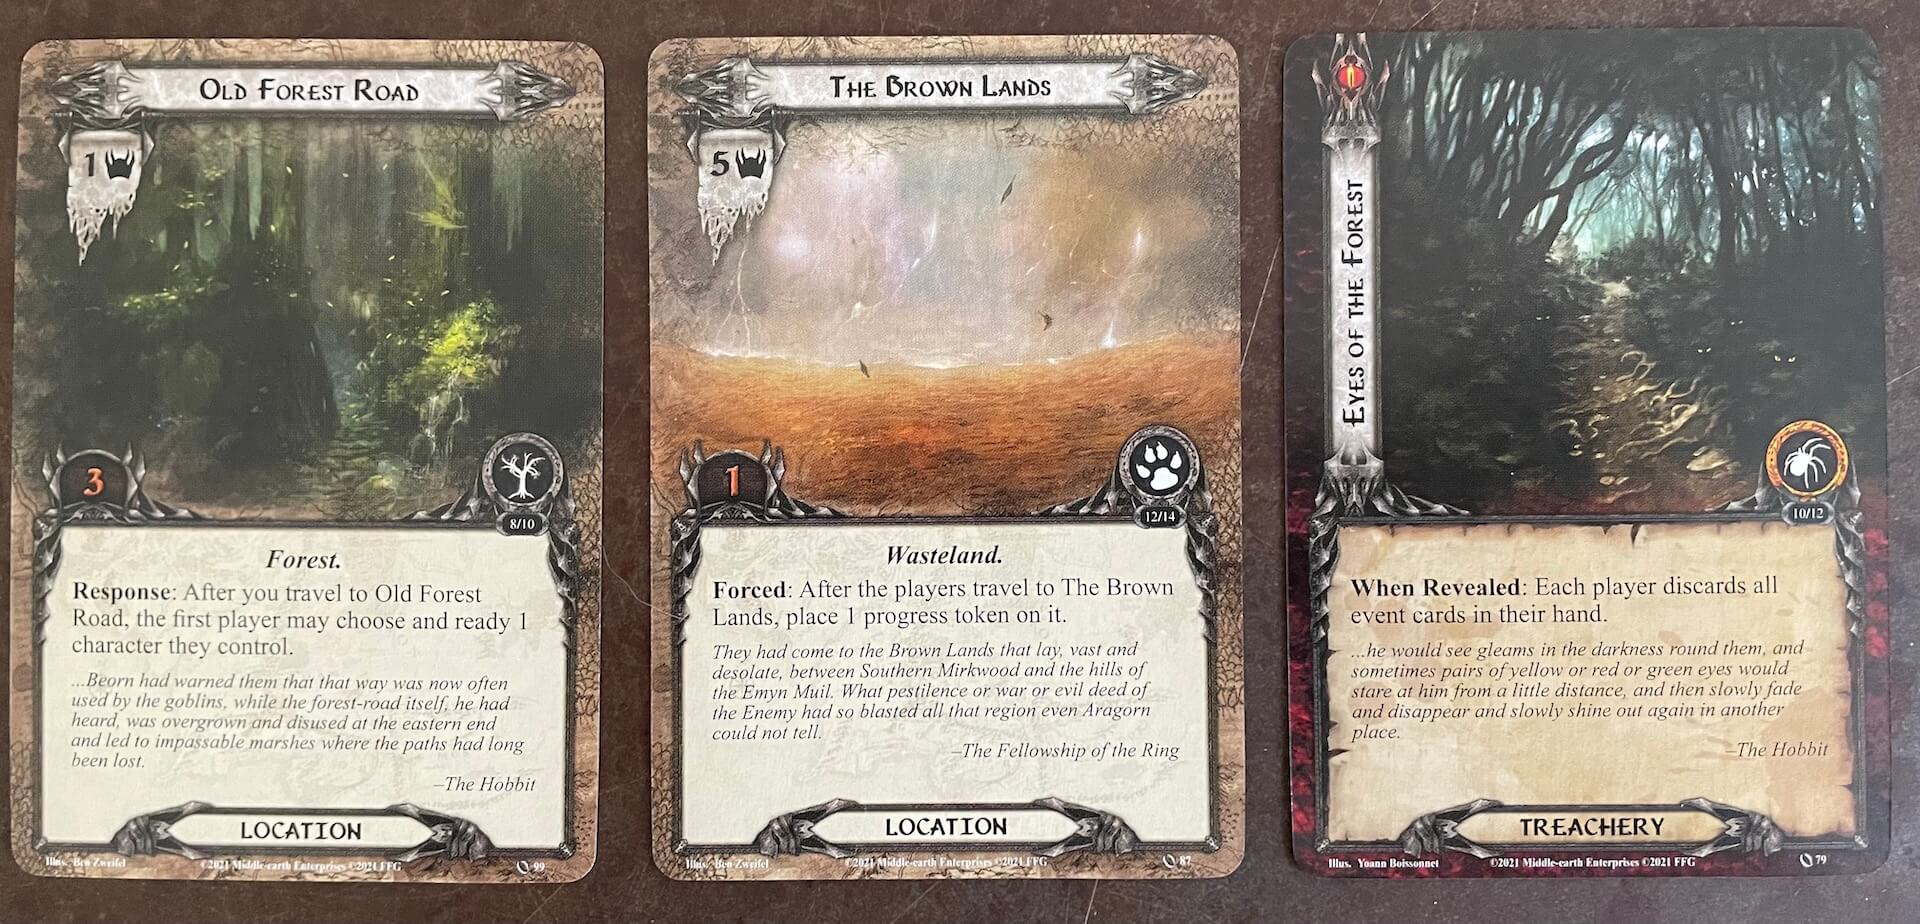 Locations and deadly Treachery cards will haunt your heroes in Lord of the Rings Card Game